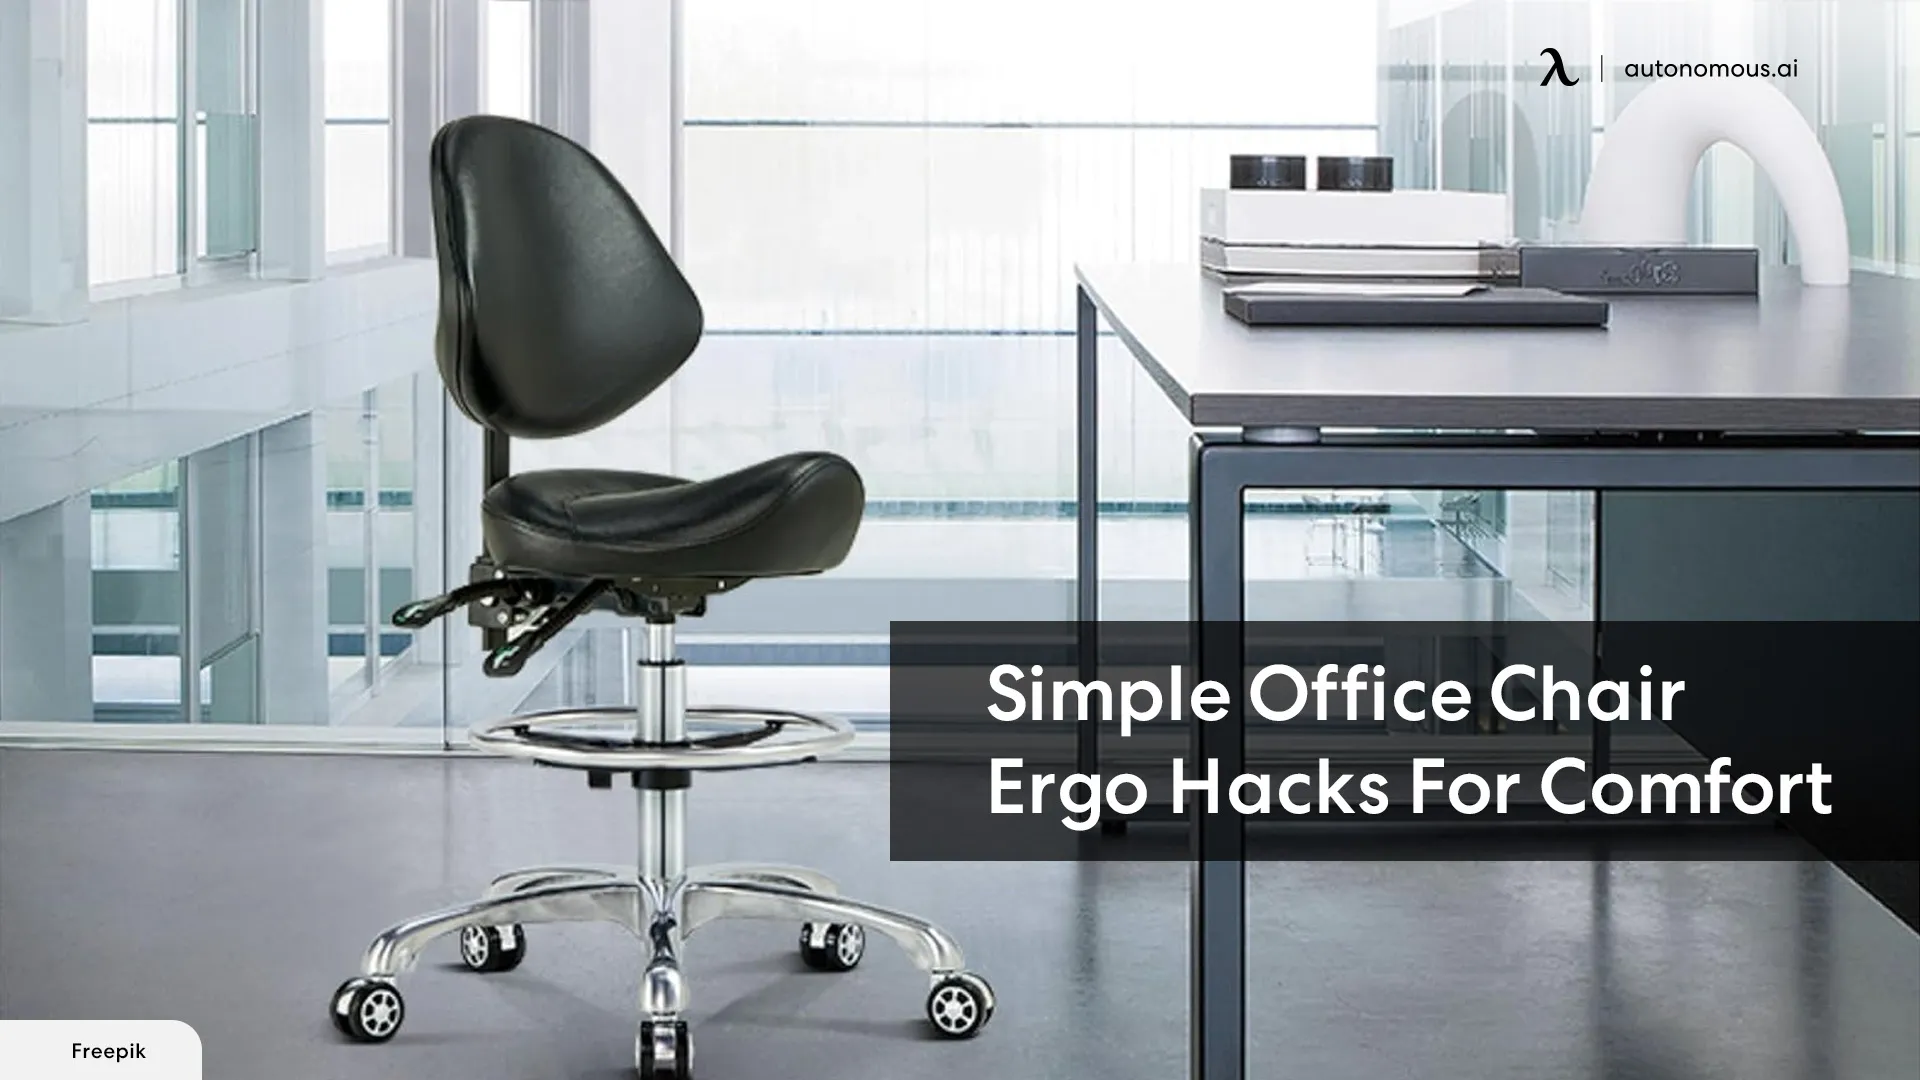 How to Make a Simple Office Chair More Ergonomic?